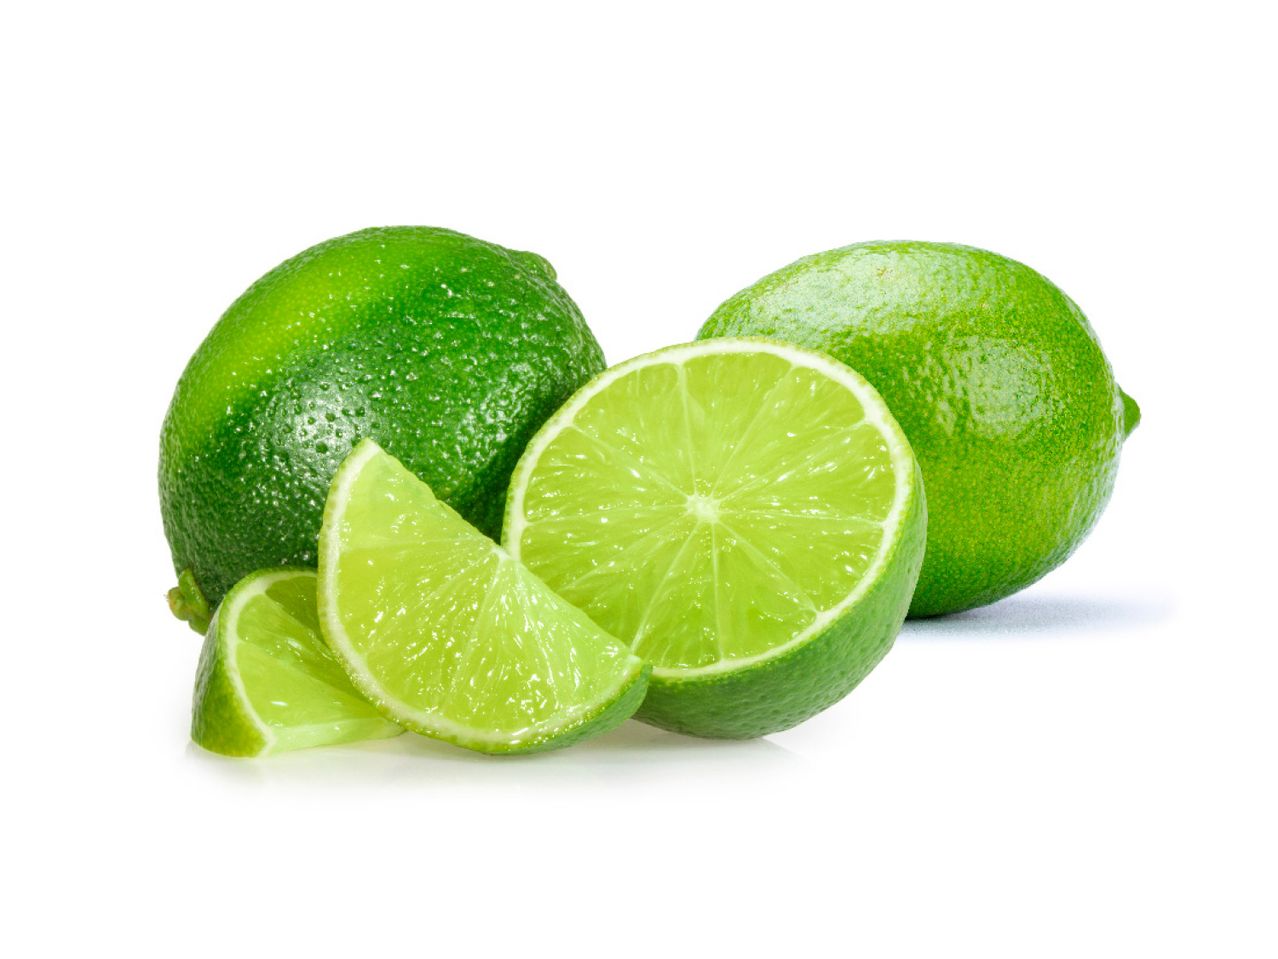 Go to full screen view: Limes - Image 1